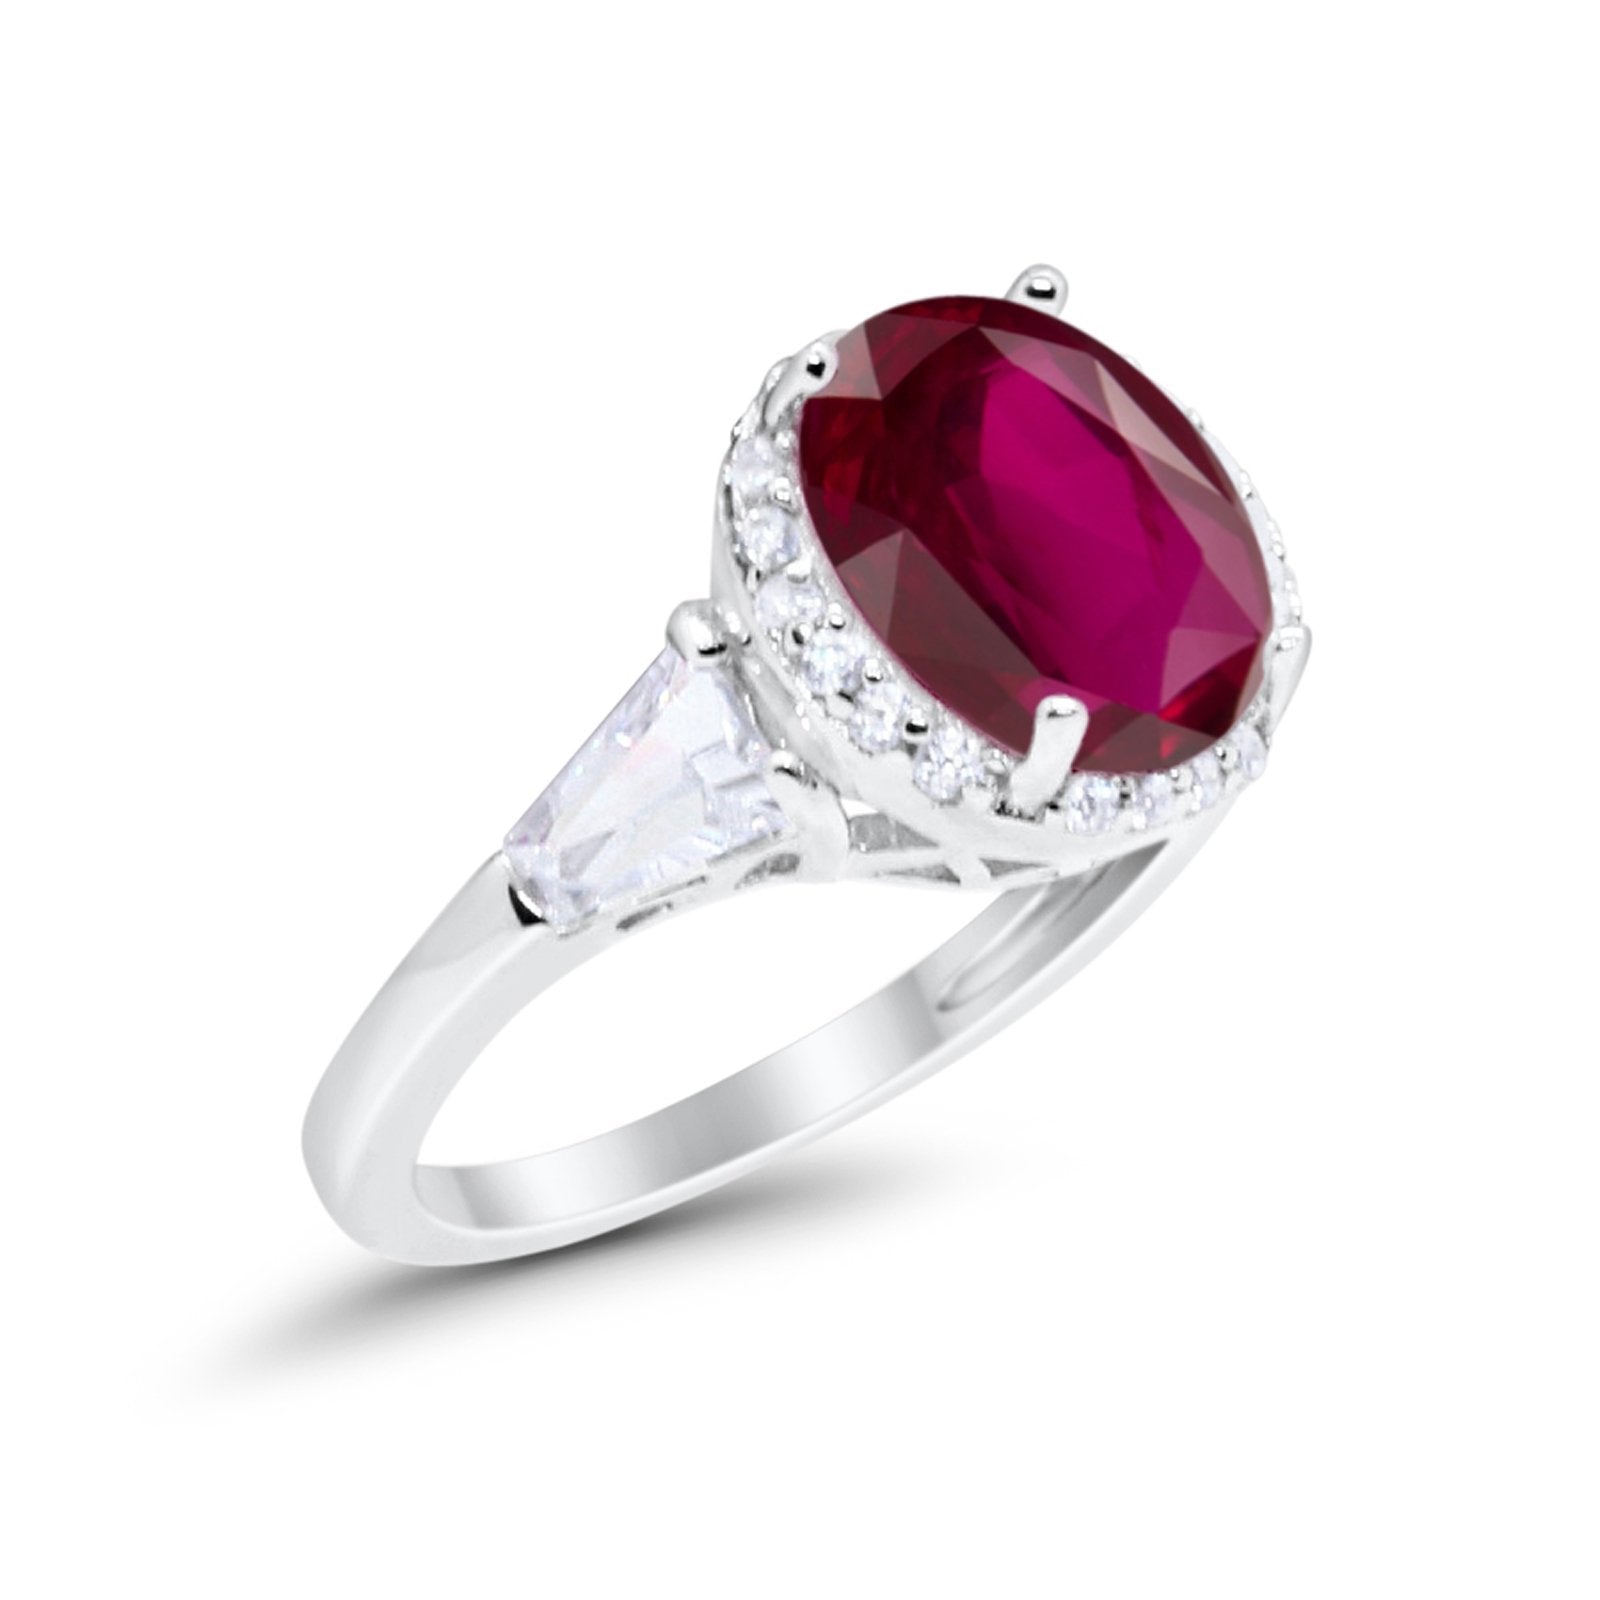 Oval Wedding Engagement Ring Baguette Round Simulated Ruby CZ 925 Sterling Silver